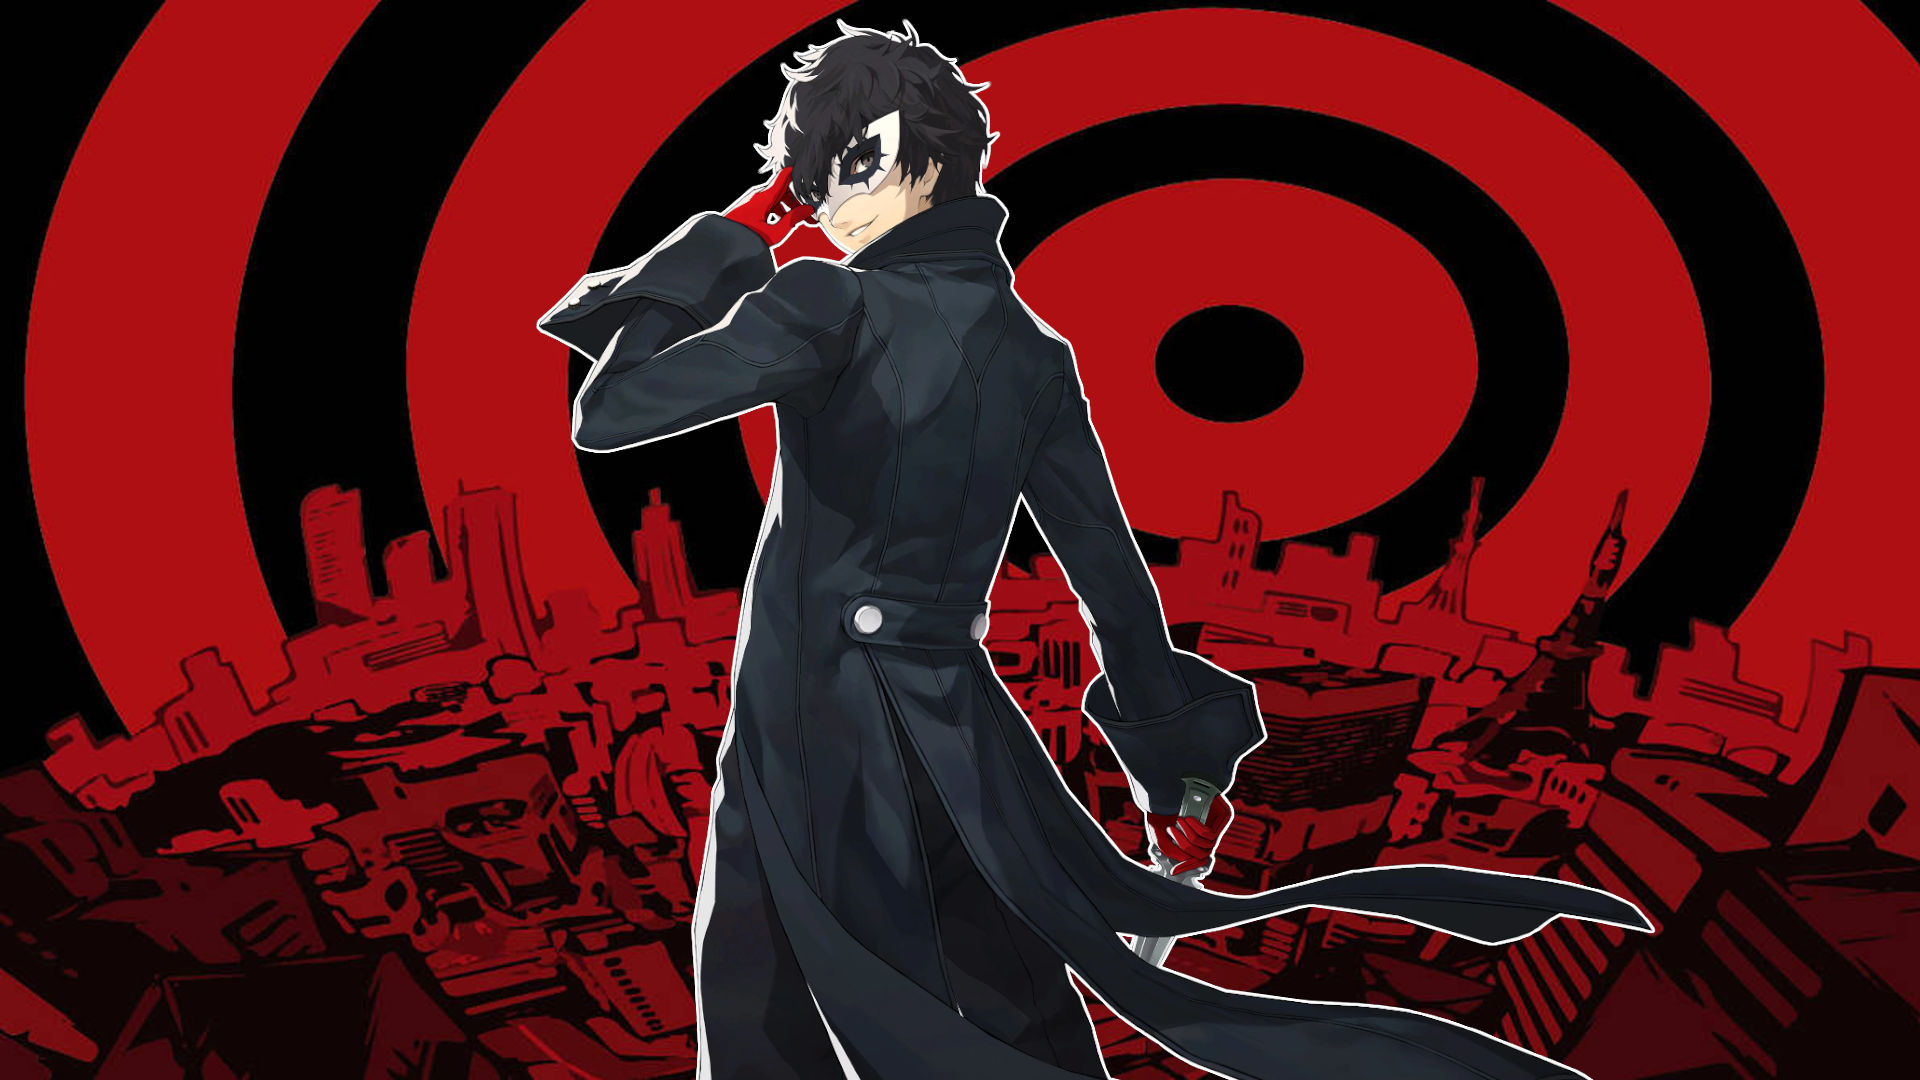 Persona 5 the Animation Characters  Persona 5, Persona, Animated characters